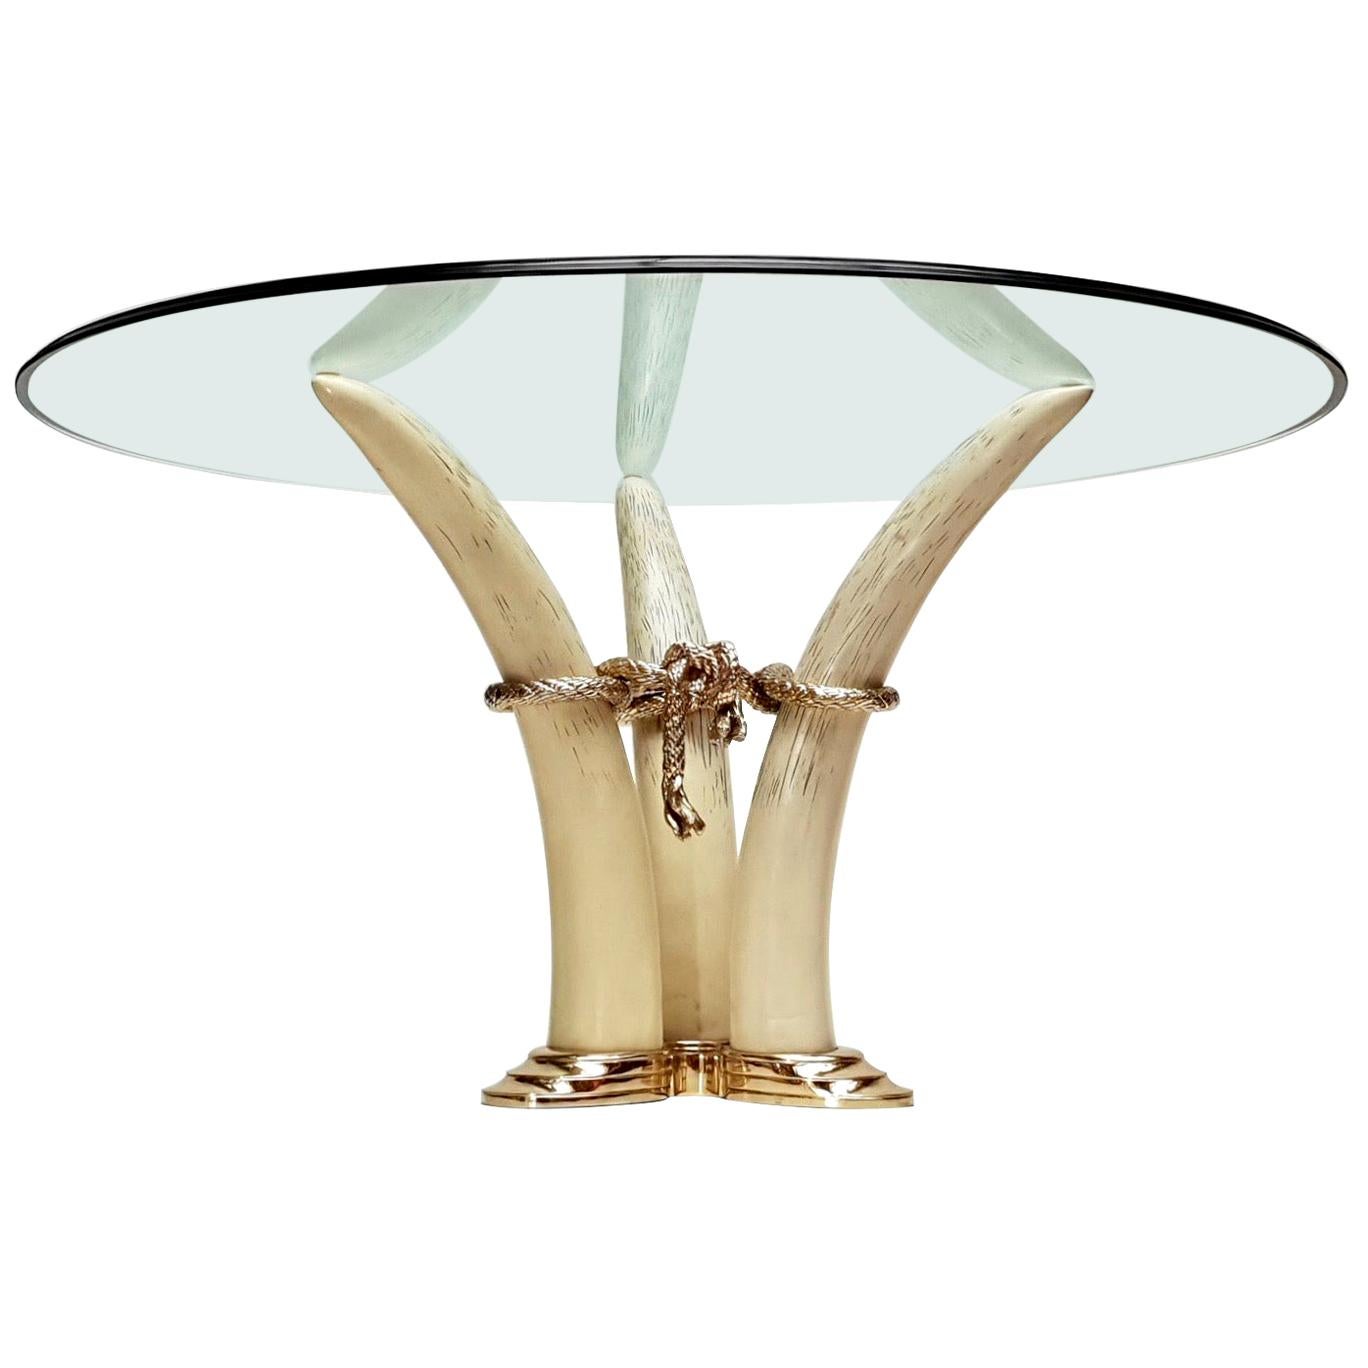 Hollywood Regency Dining Table by Valenti, Barcelona, Spain, circa 1970-1980 For Sale